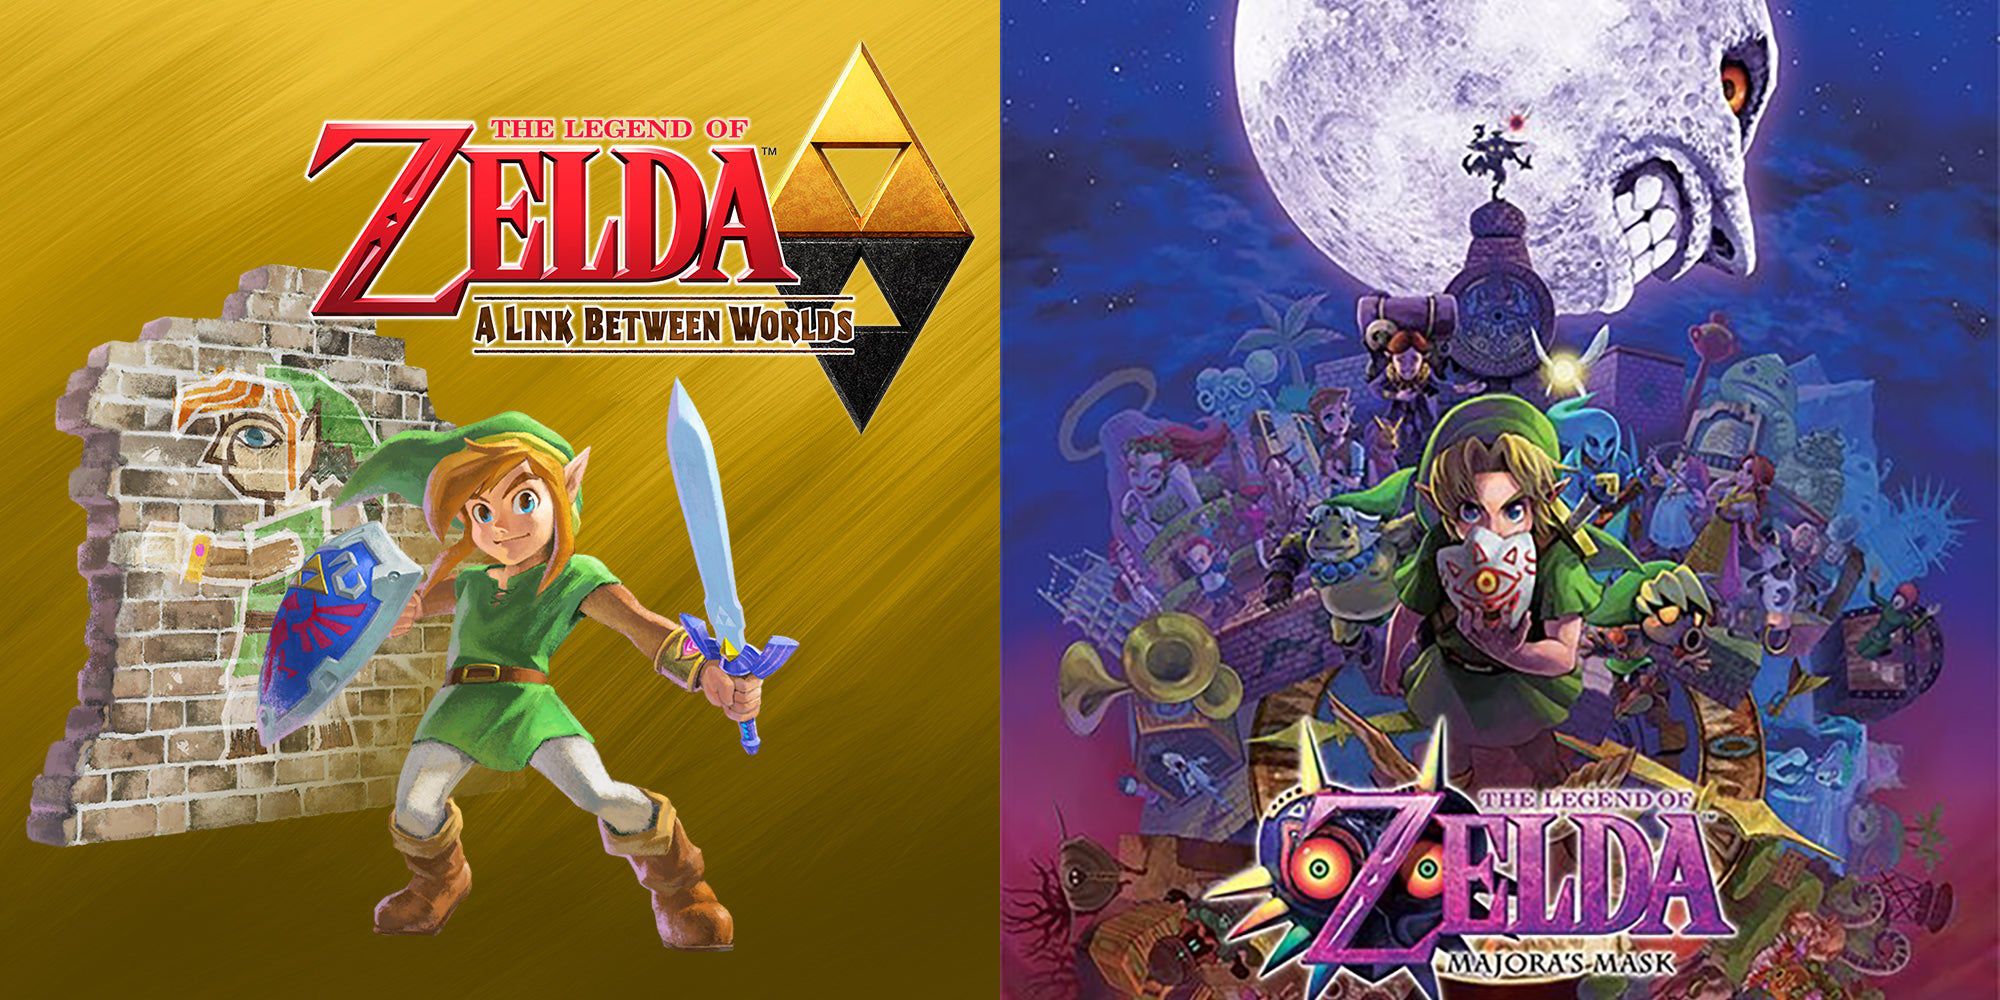 The best Zelda games, music, toys, books, and figures - Polygon